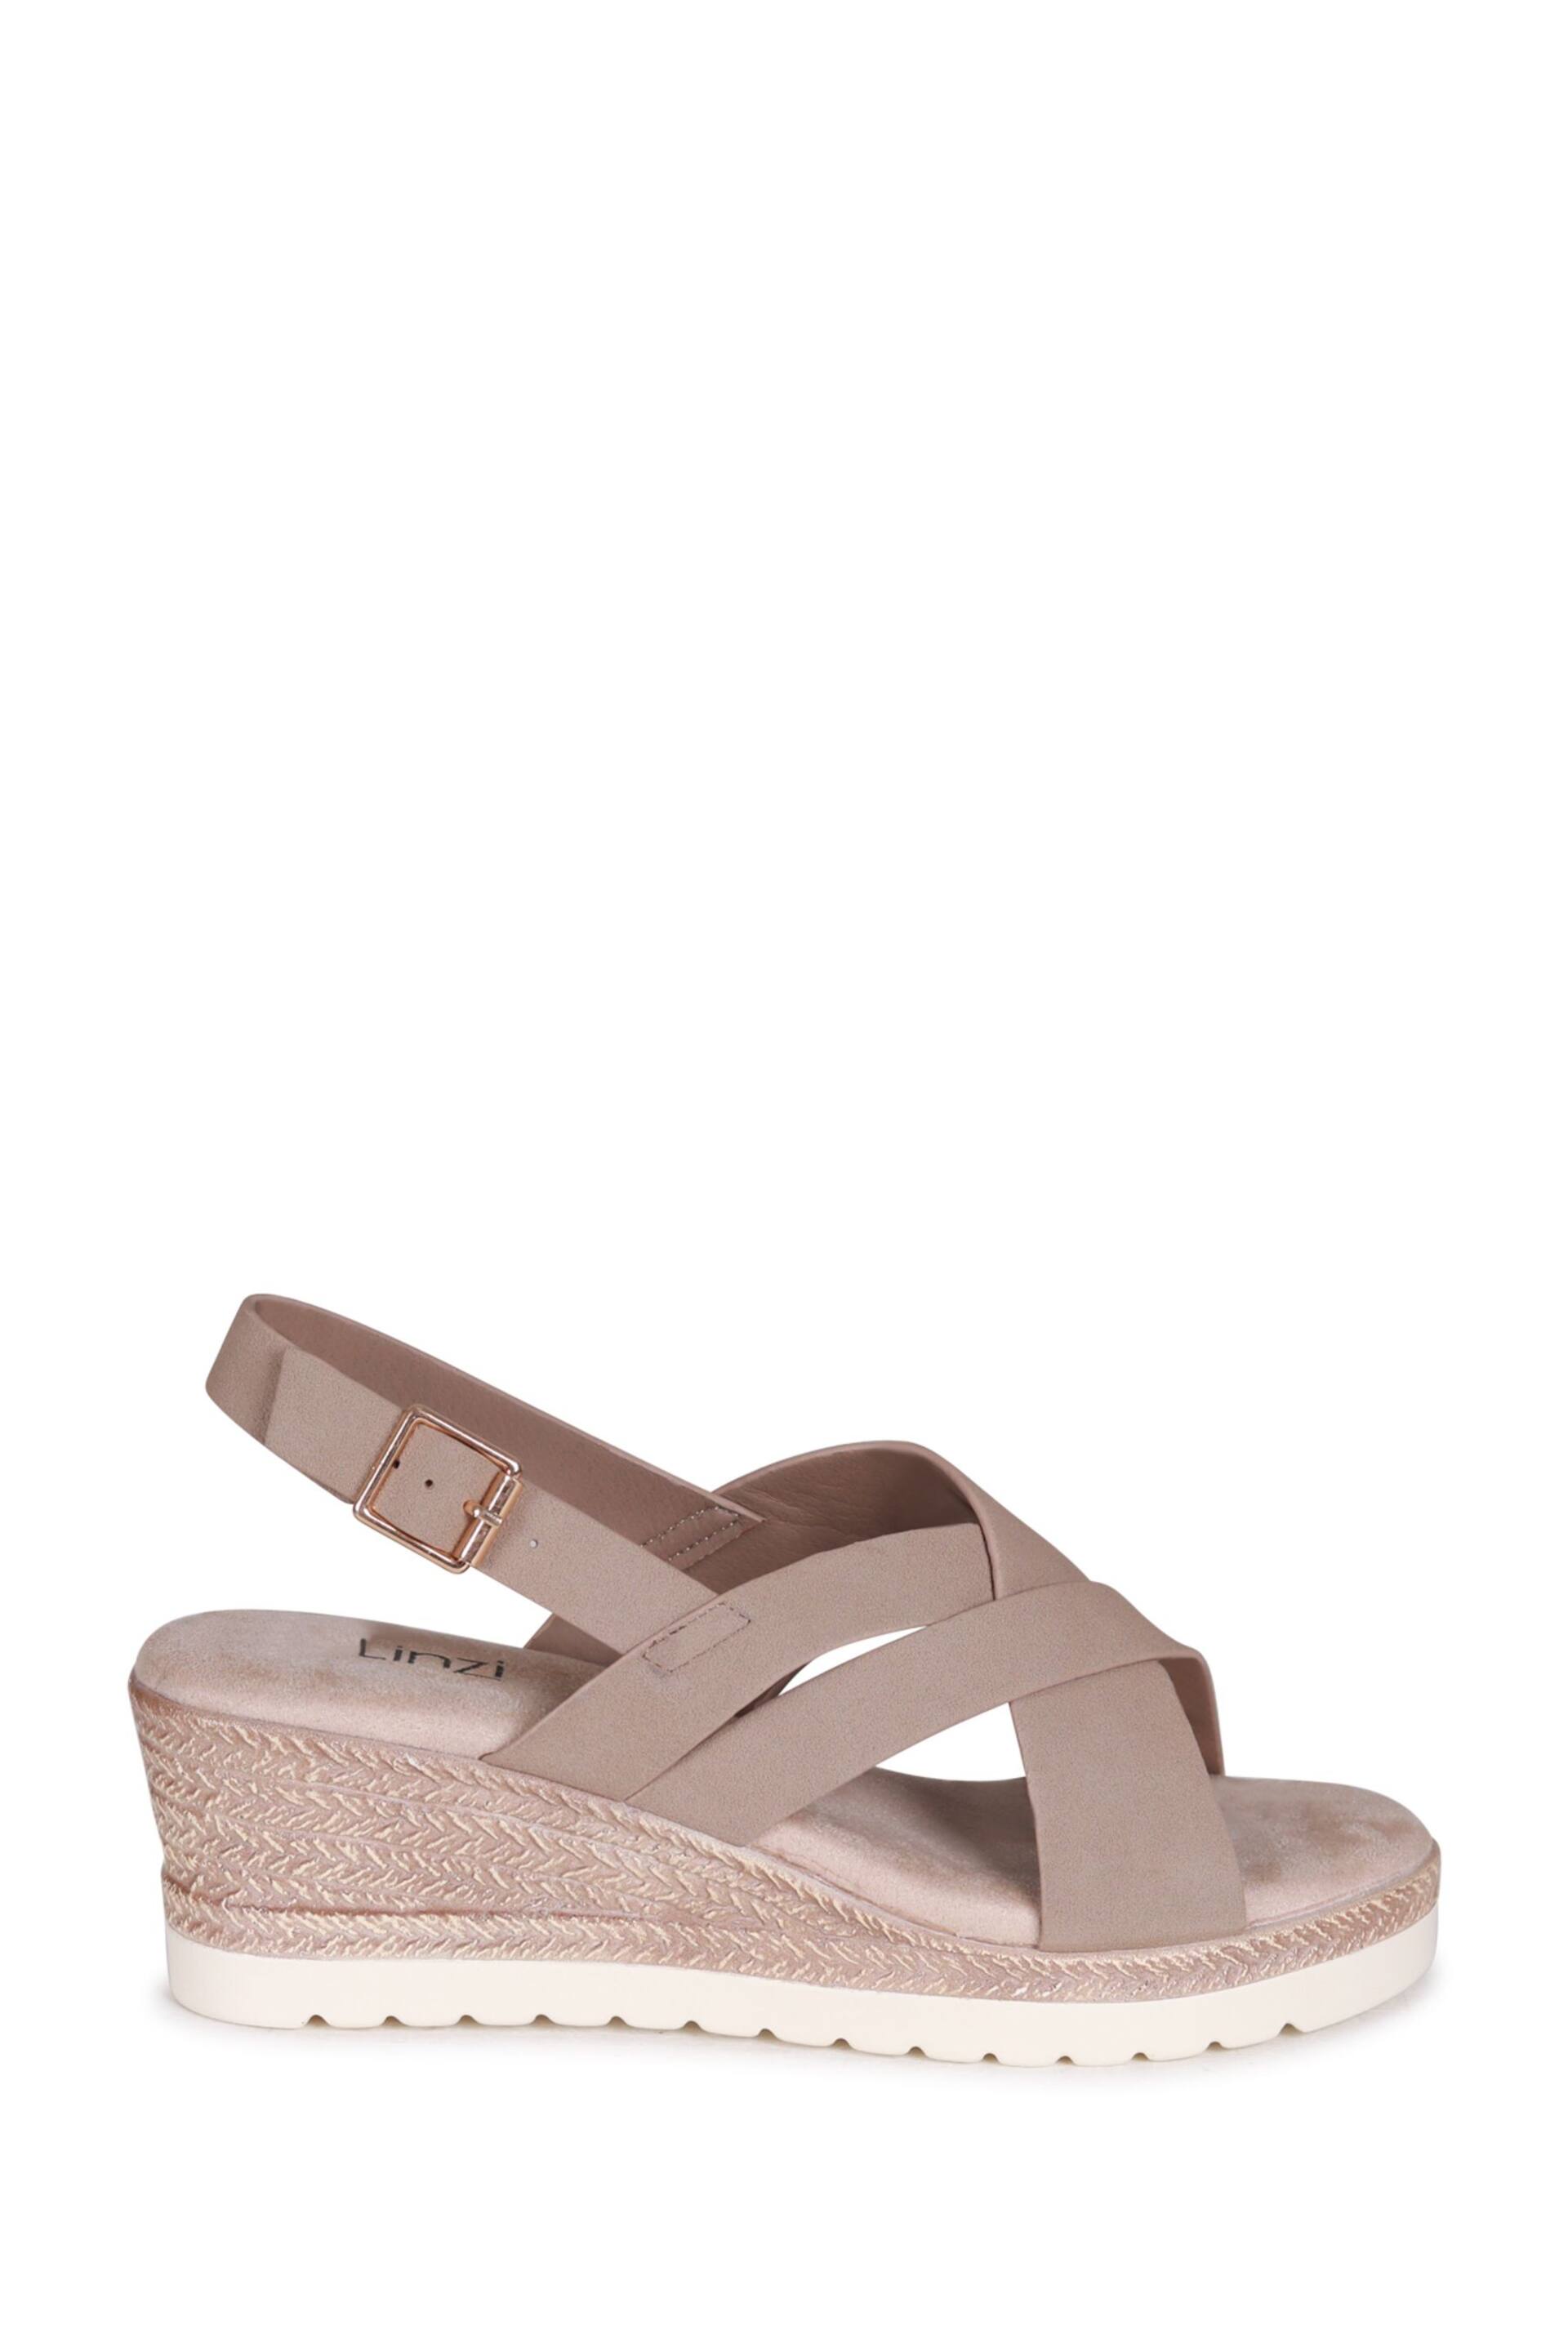 Linzi Natural Myla Sling Back Wedge Espadrille Sandals With Cross Over Front Strap - Image 2 of 4